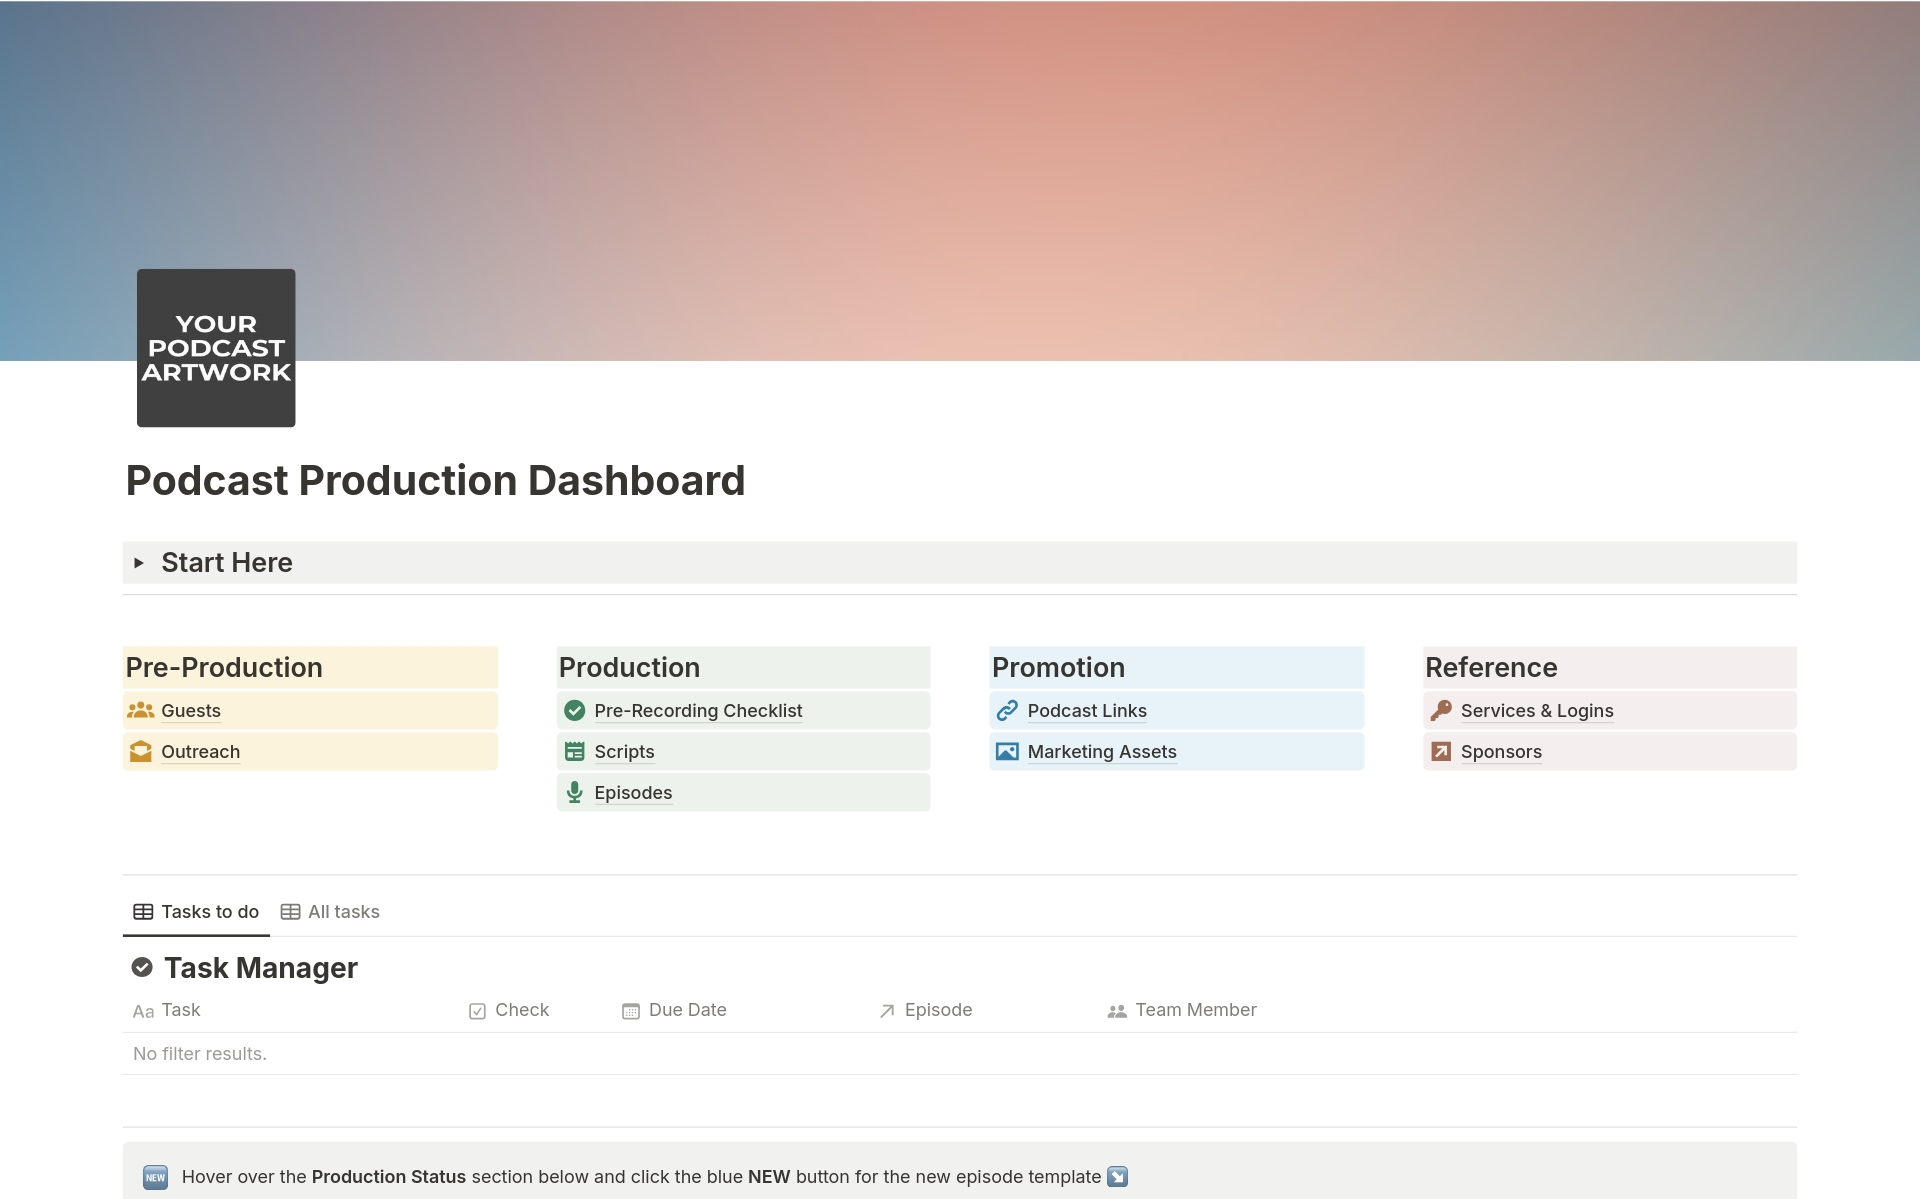 Manage your entire podcast production workflow in this Notion dashboard

This fully customisable dashboard will support you or your team through the entire podcast production process from pre-production through to promotion.